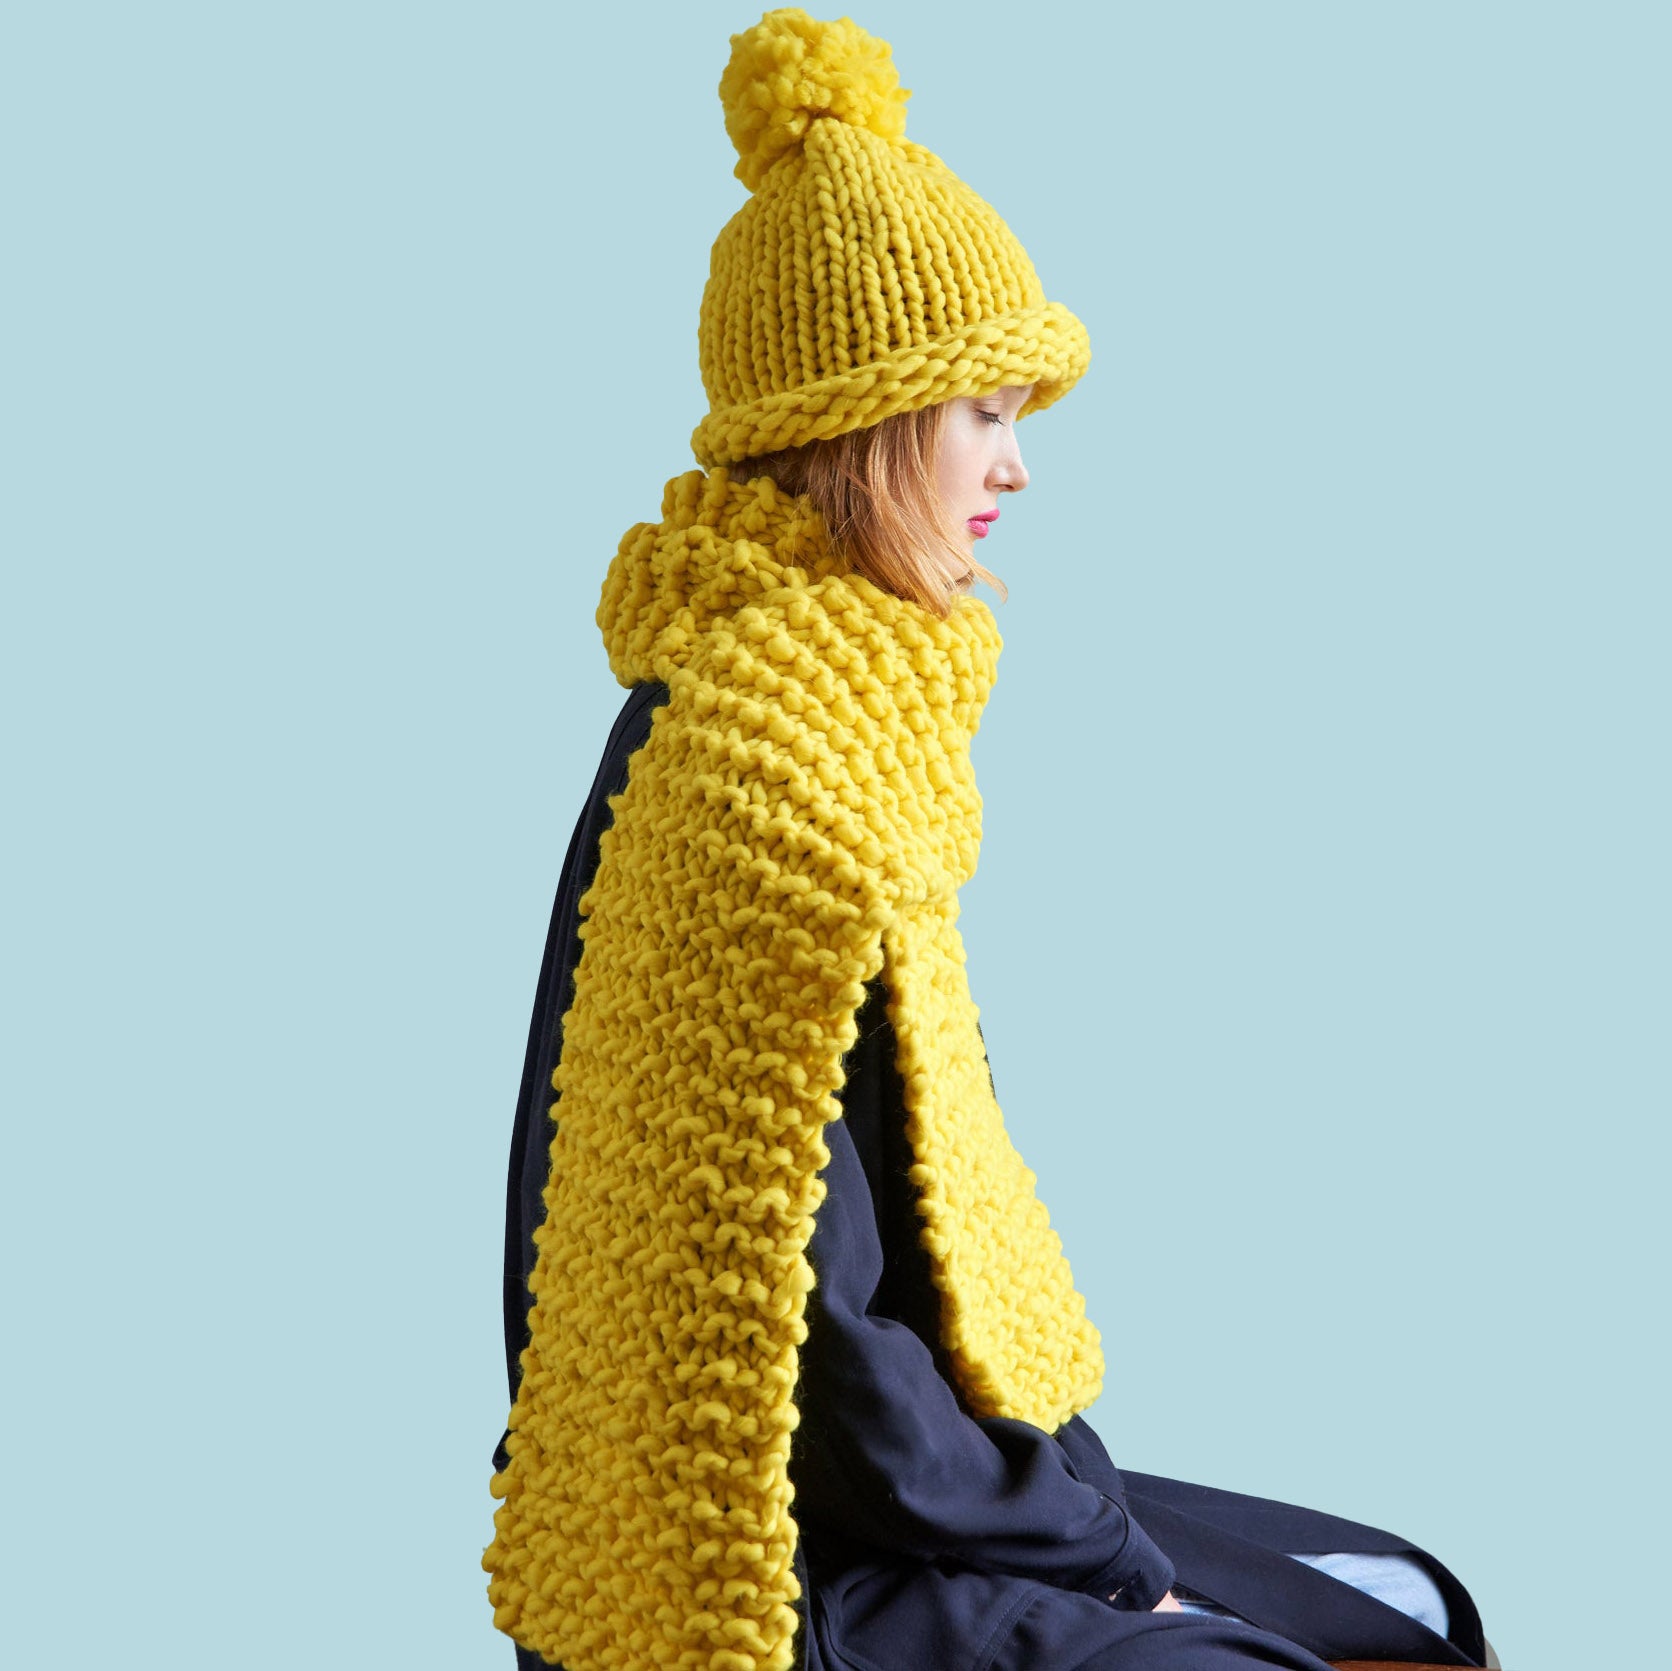 Loopy Mango: Made for Making - Yarn & DIY kits - Learn to Knit with us